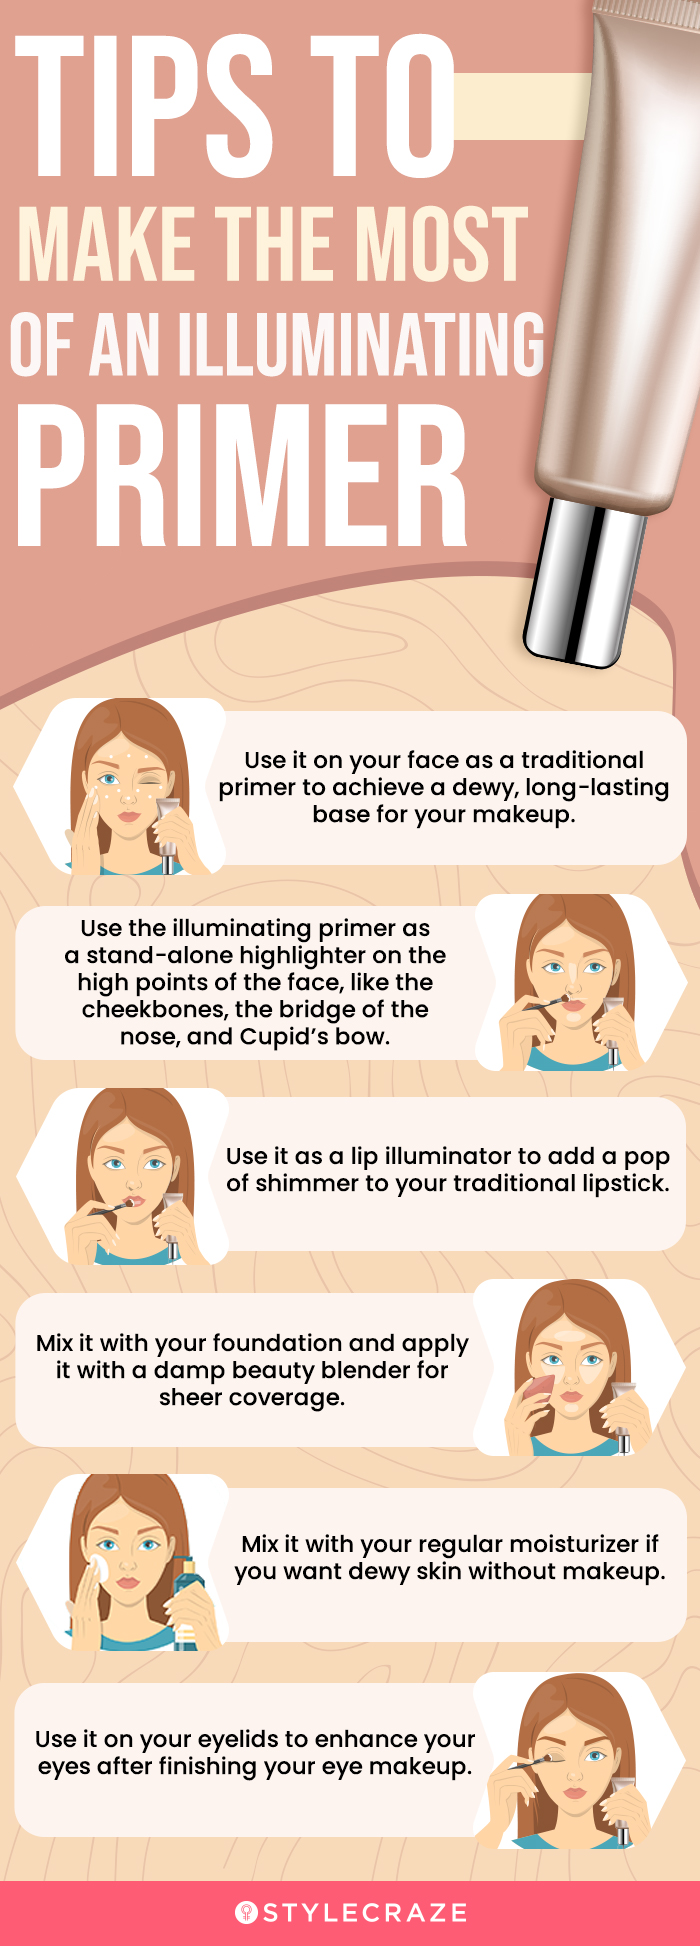 Tips To Make The Most Of Illuminating Primer